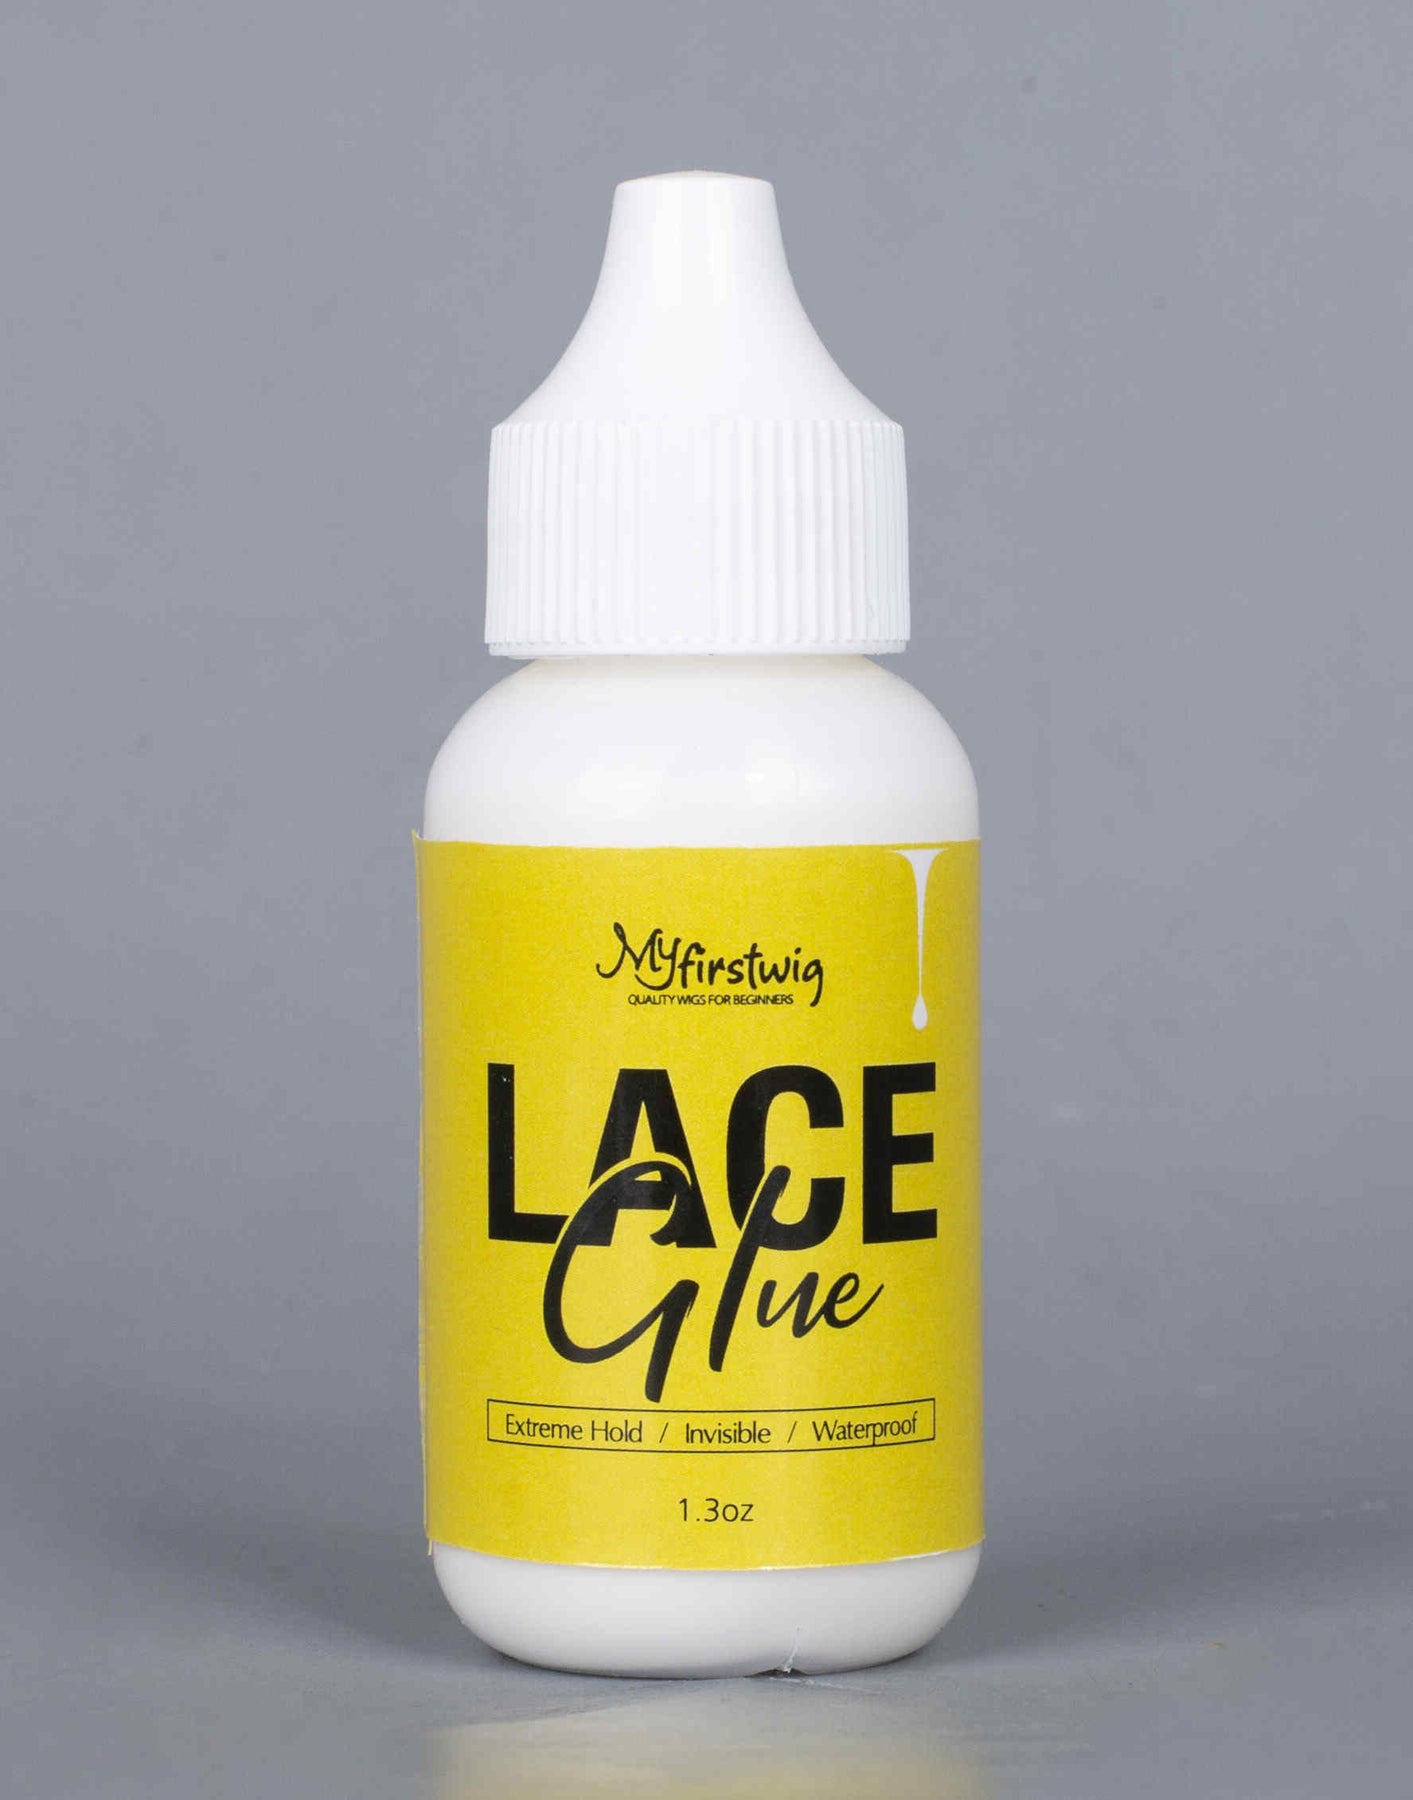 Myfirstwig Lace Glue & Remover Set